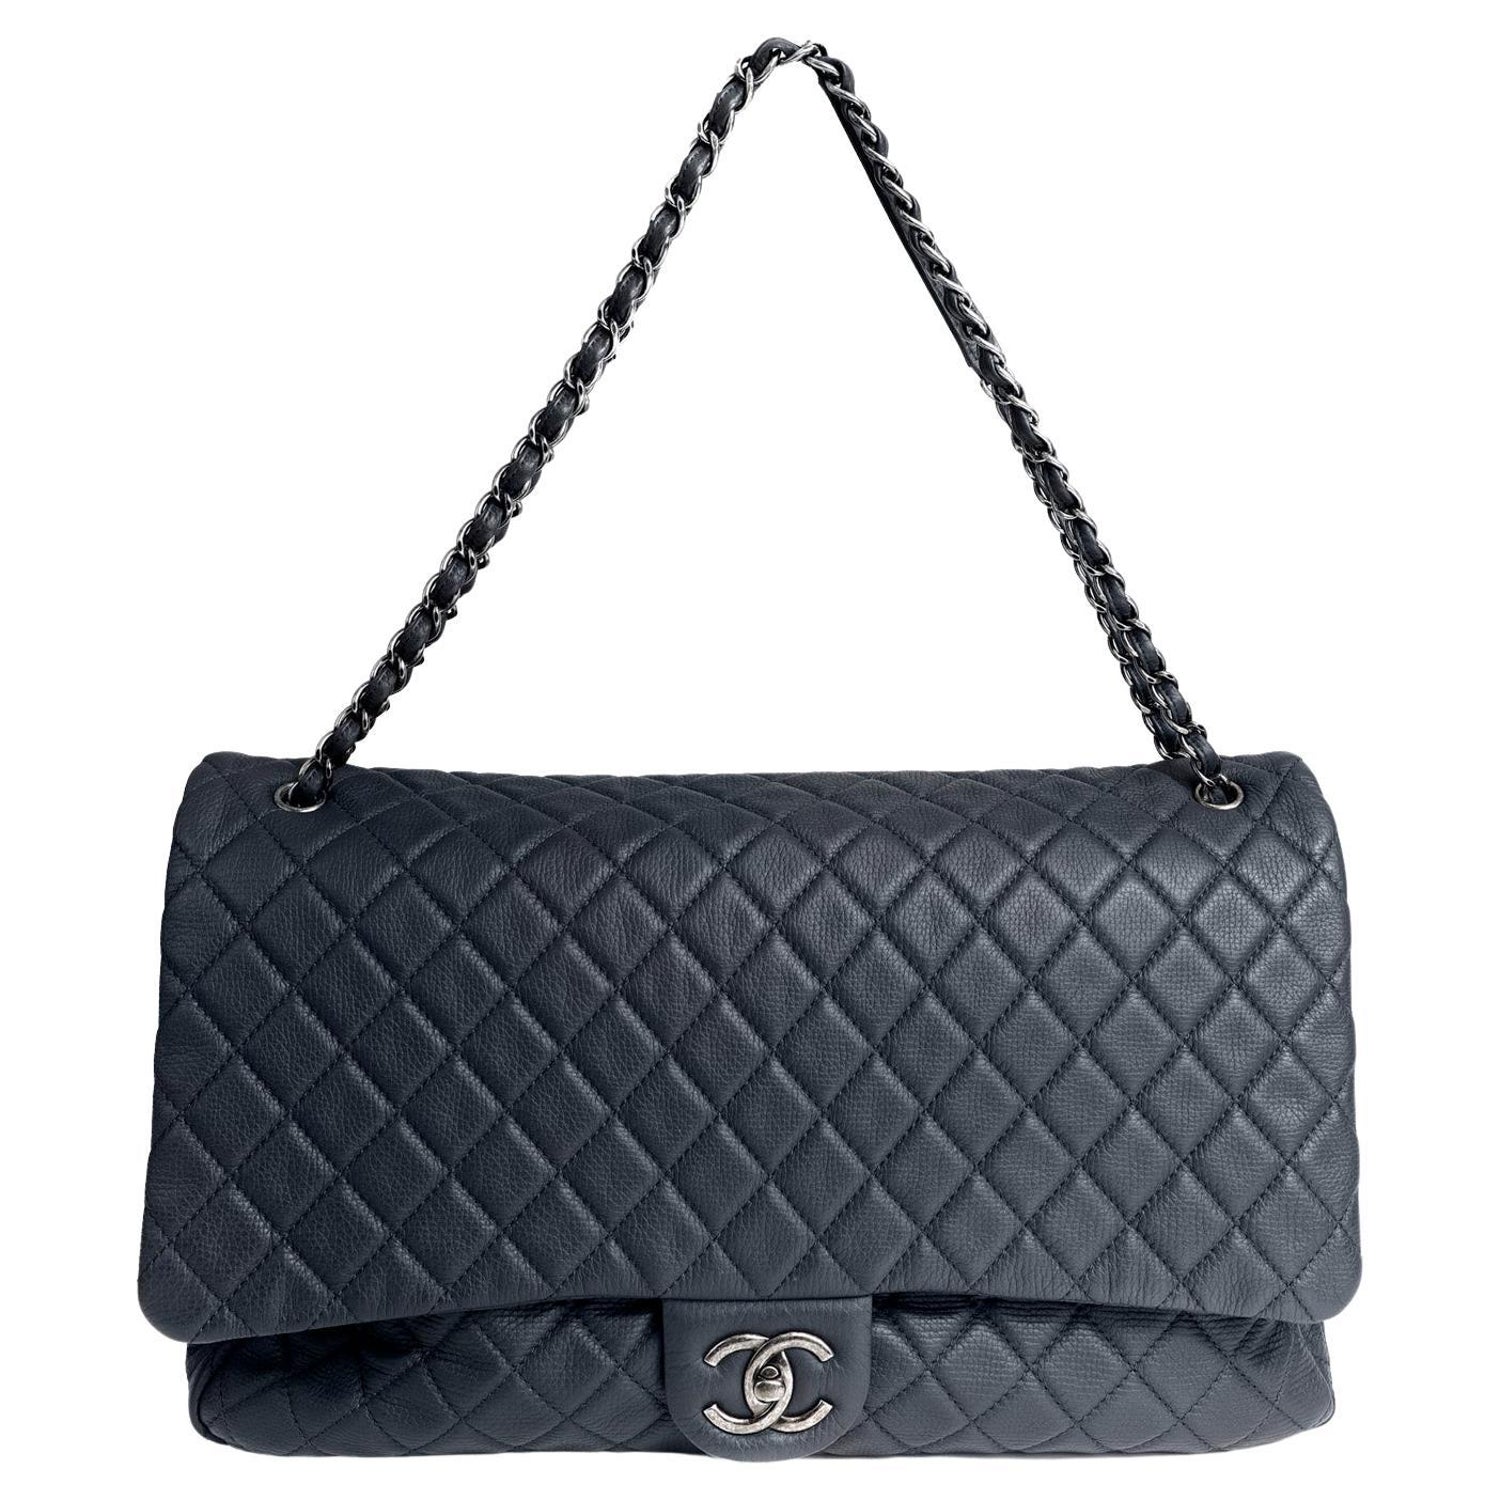 Chanel VIP Mesh Tote and Makeup Bag replica - Affordable Luxury Bags